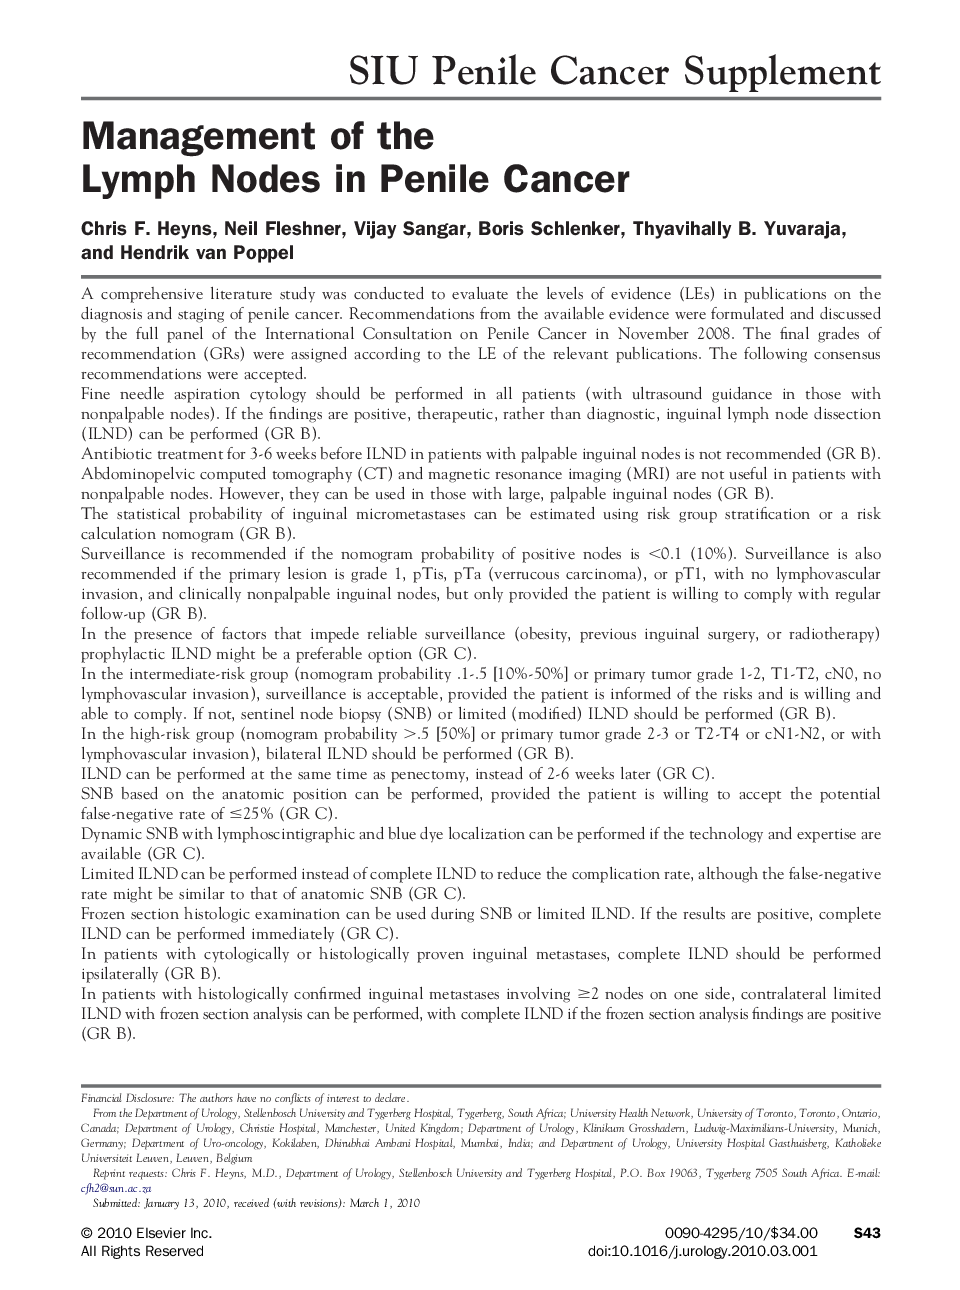 Management of the Lymph Nodes in Penile Cancer 